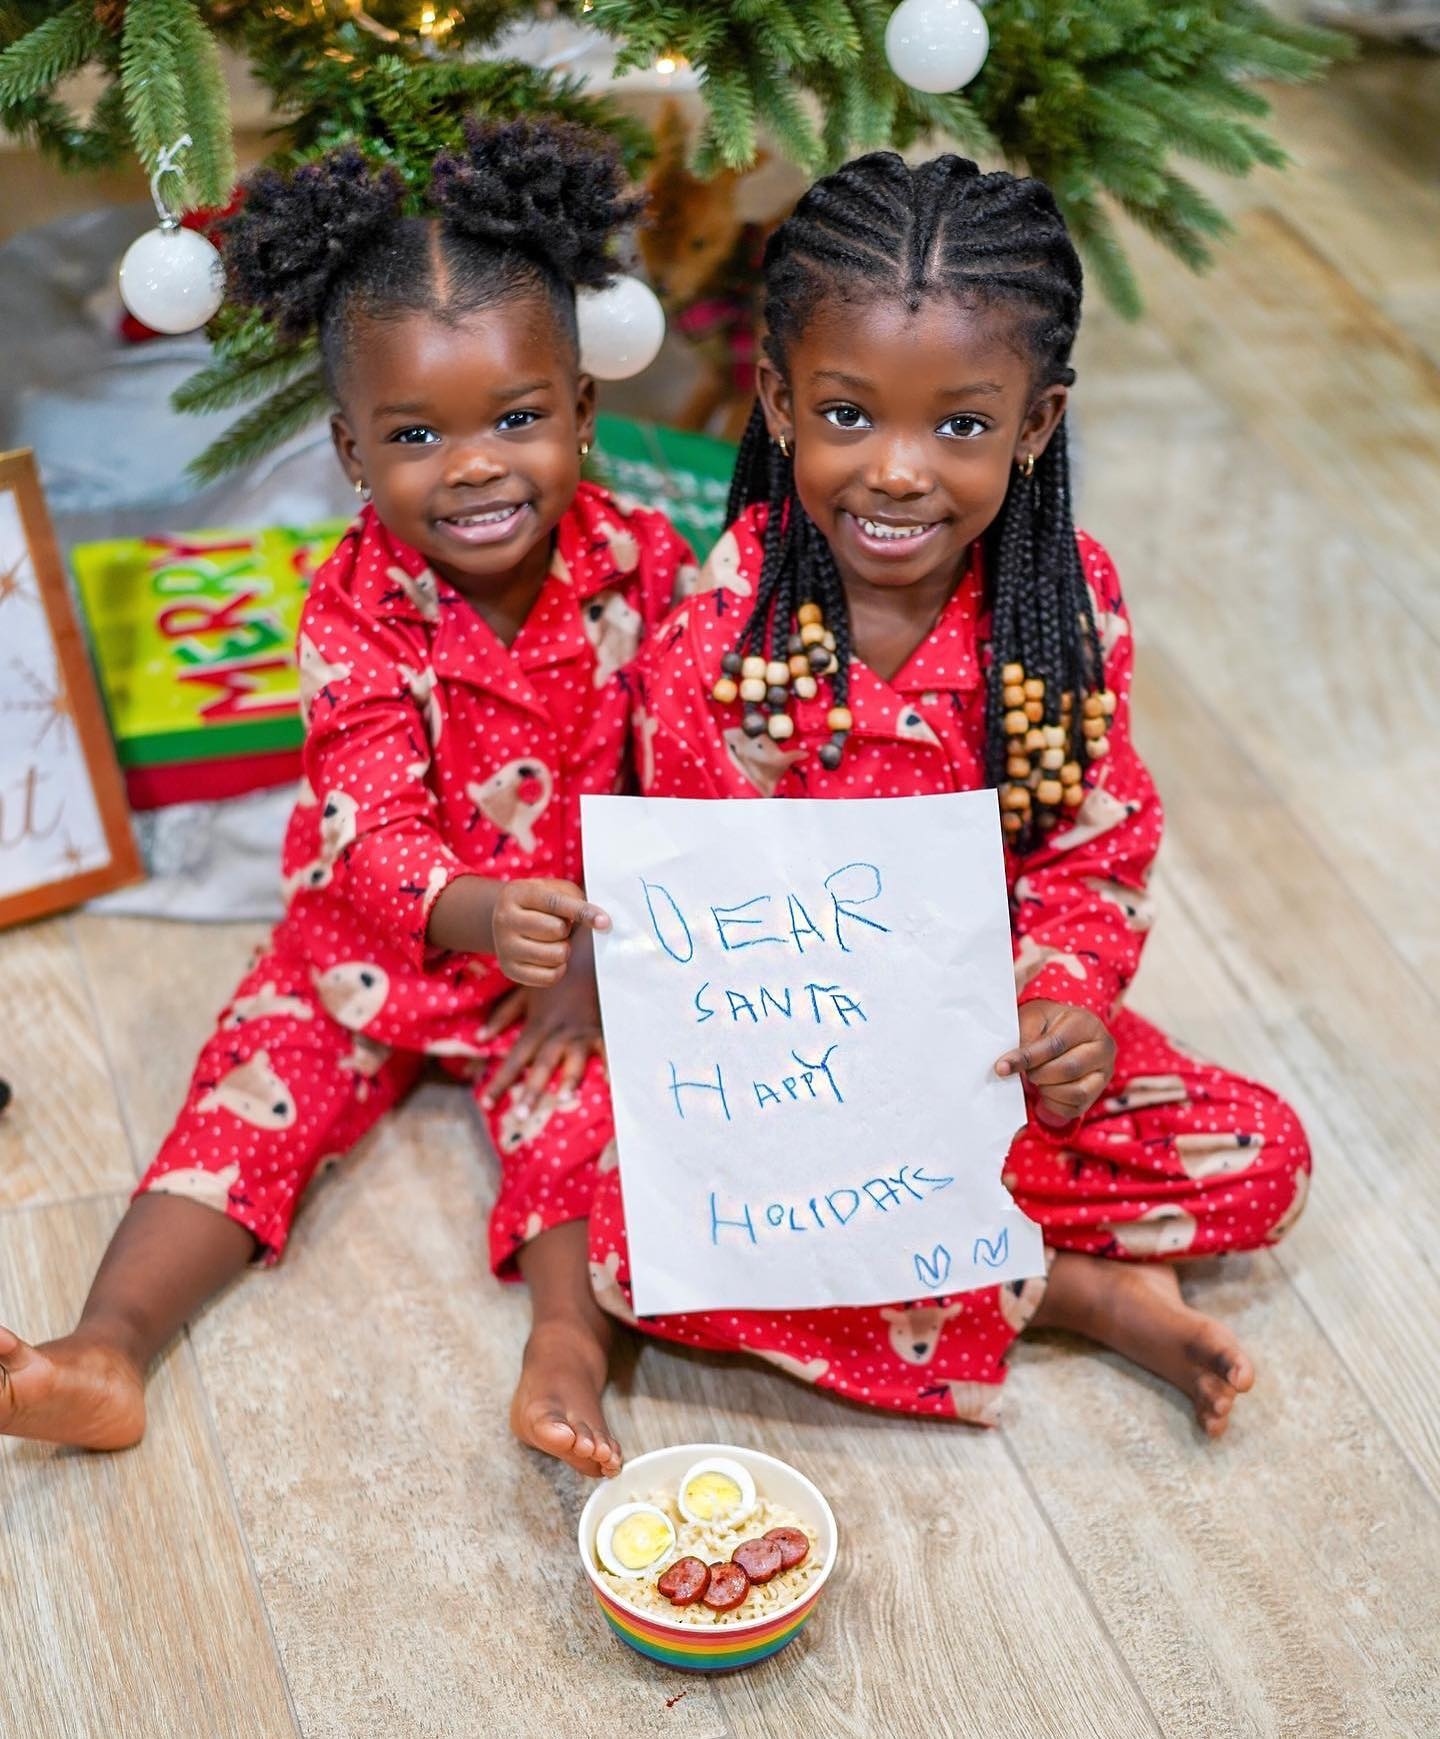 Leaving Santa ramen instead of cookies. 😀⁠
⁠
#repost @rie_defined ⁠
⁠
‘Twas Christmas 2021 & the girls were waiting on Santa to come get his bowl of @maruchan_inc noodles while they were hot & ready. ⁠
⁠
Hopefully he arrives on Thanksgiving this year cuz their patience grow shorter & shorter as the years progress…⁠
⁠
Do y’all think Santa will be good to both Layla & Linah??? 🤔 ⁠
⁠
#LivingLahai #FroBabies #NaturalHair #NaturalHairStyles #NaturalHairDaily #BlackMomsBlog #BlackMothers #BlackMotherhood #MunaMommy #BlackGirlMagic #Viral_QT #NaturalHairKids #DarkSkinGirls #ShareTheEveryMom #BlackLove #BlackJoy #BlackFamiliesMatter ⁣ #thecrownact #BlackFamilyGoals #TheFamilyDiary ⁣#BlackFamilies #TheWorldsFavoriteBaby #TeamMotherly #munamommy